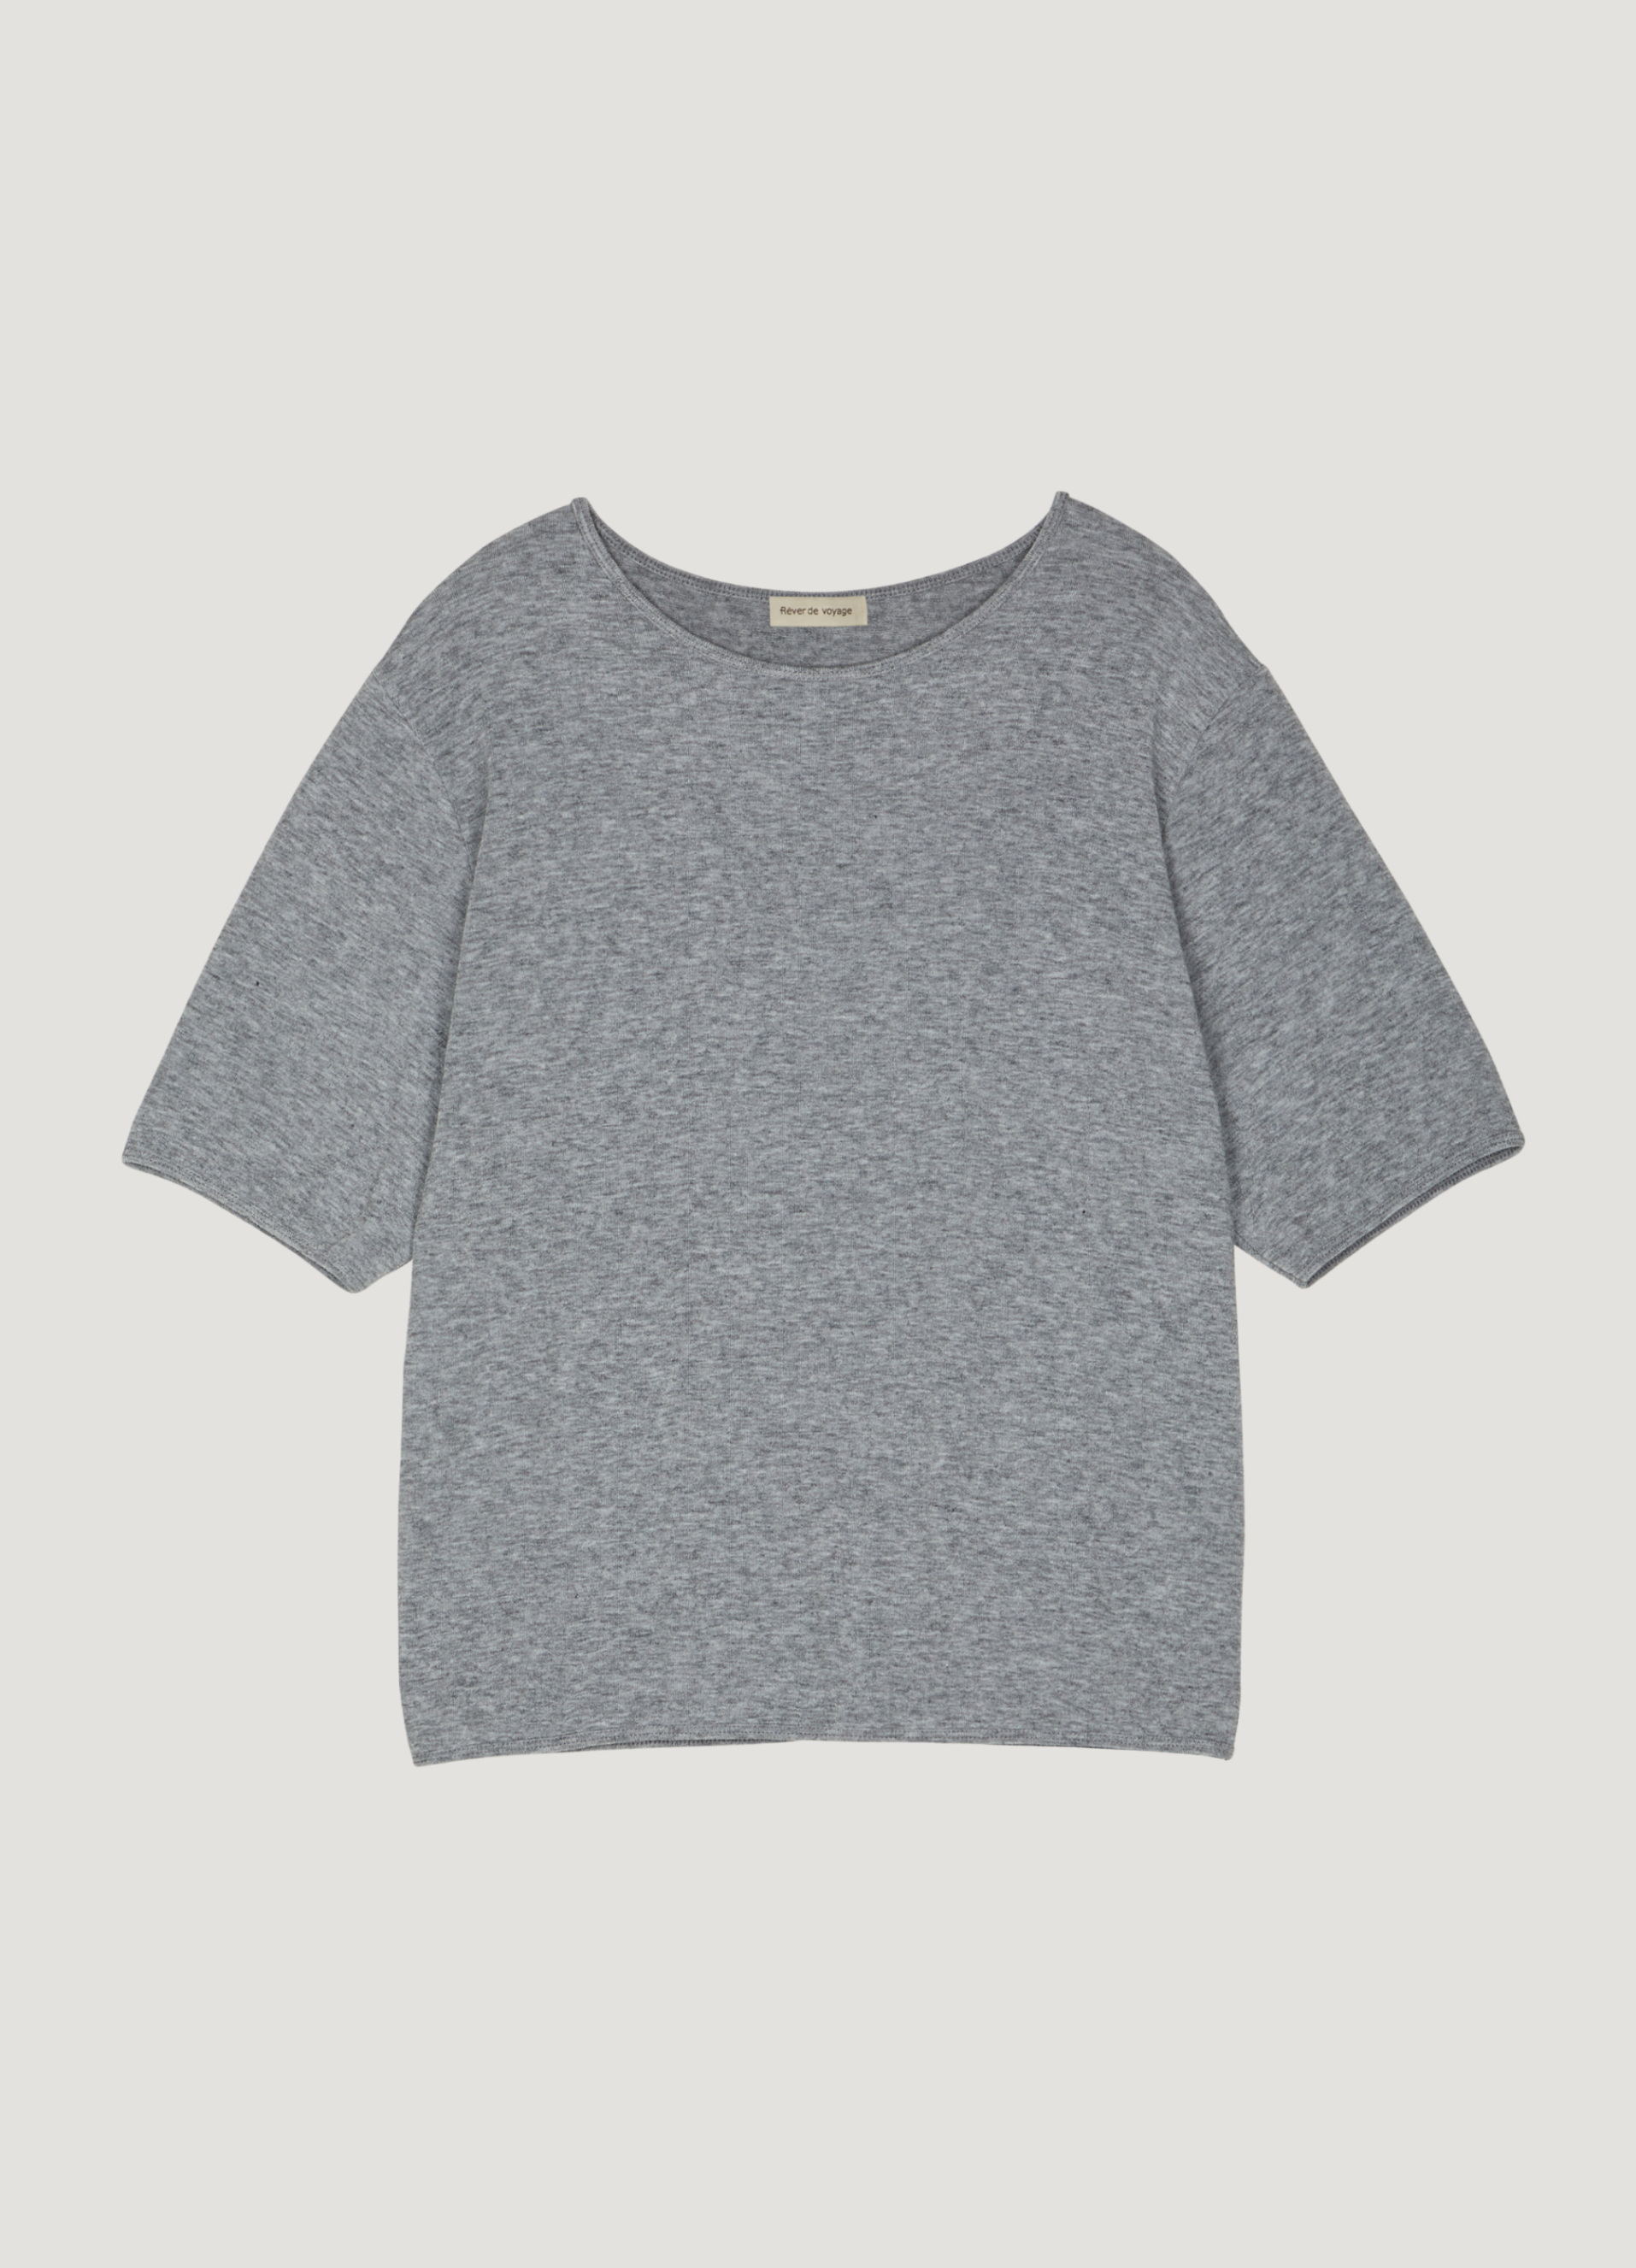 Bulky Wool Span T-shirt (Melange Gray) out of stock